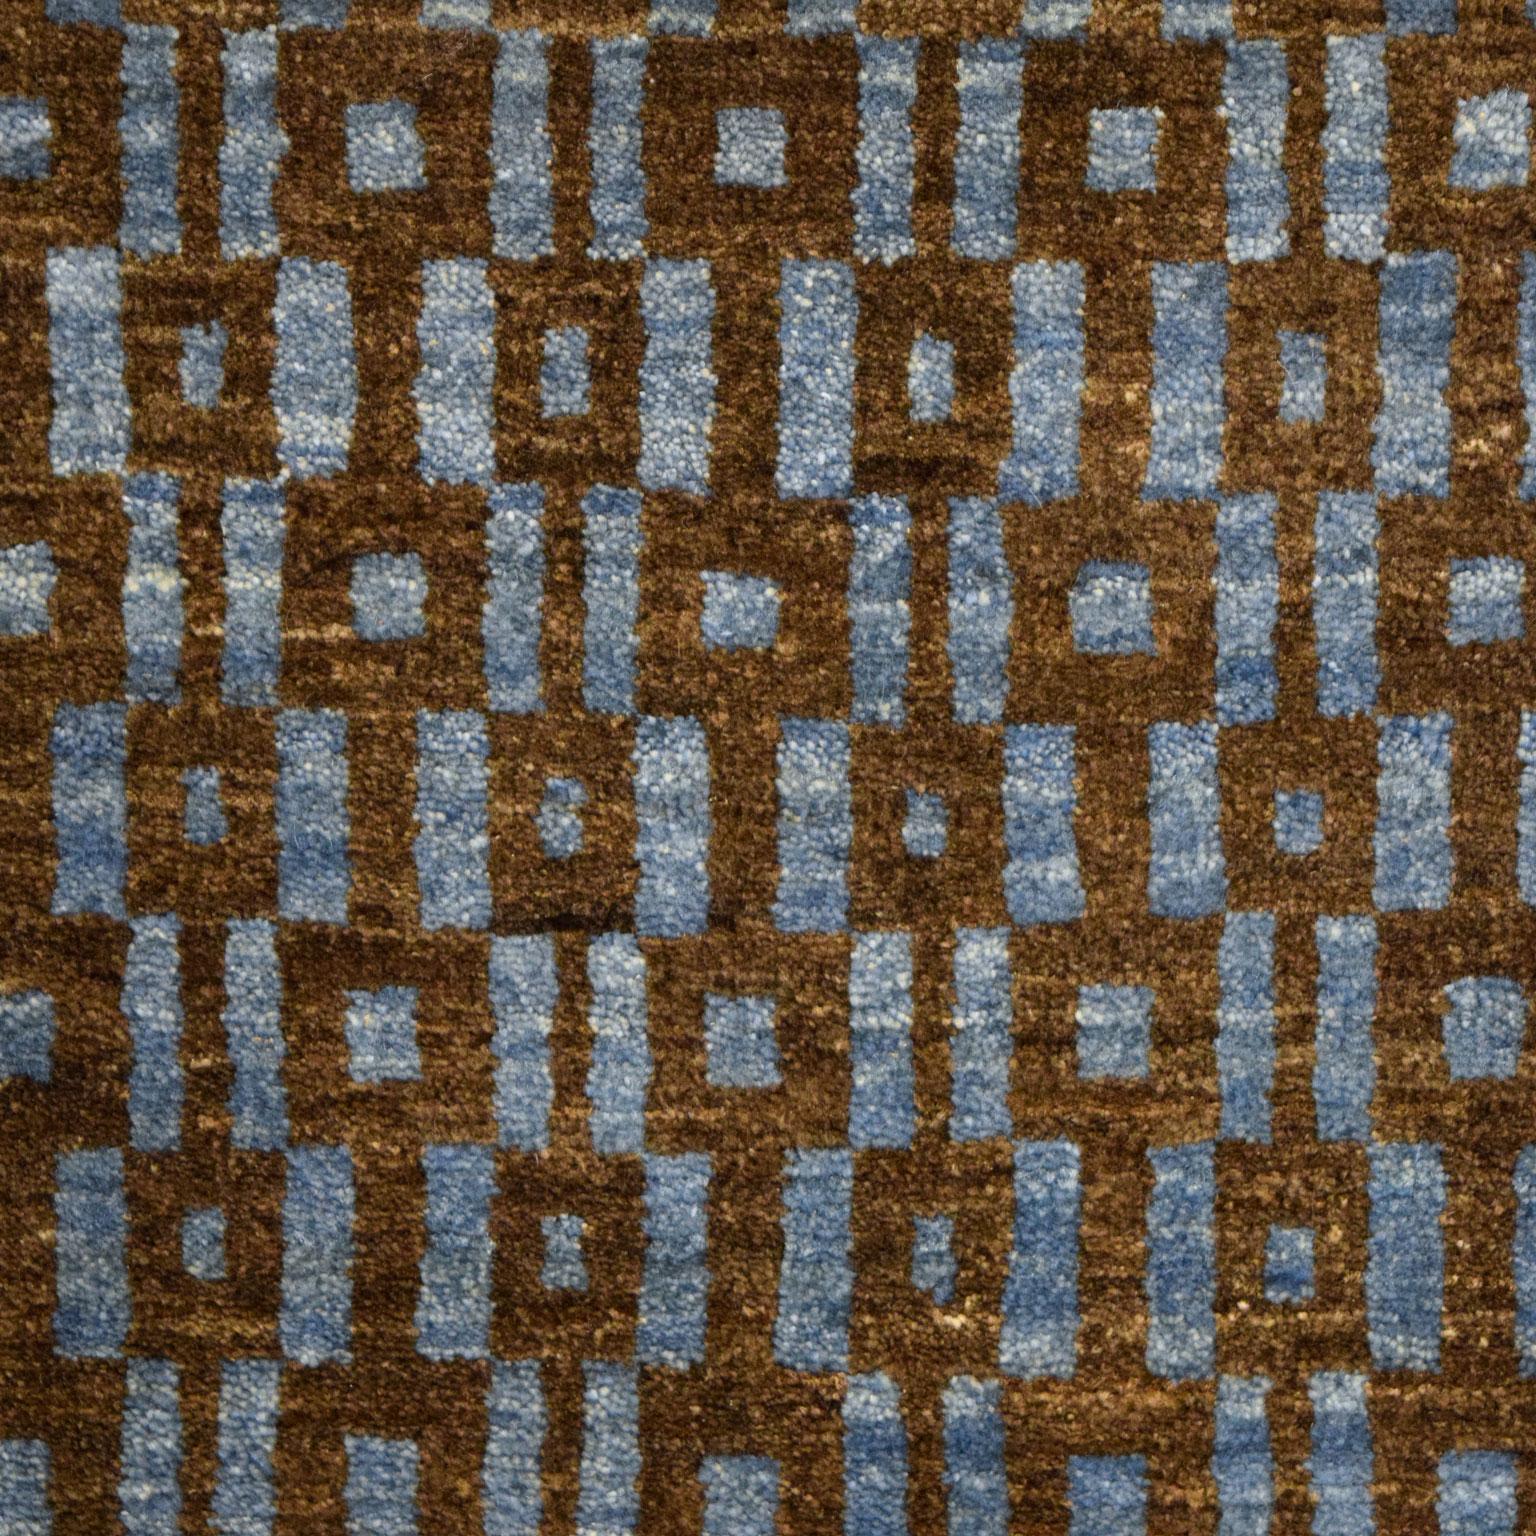 Mid-Century Modern Contemporary Persian Rug, Blue and Brown Wool, Orley Shabahang, 4' x 6' For Sale